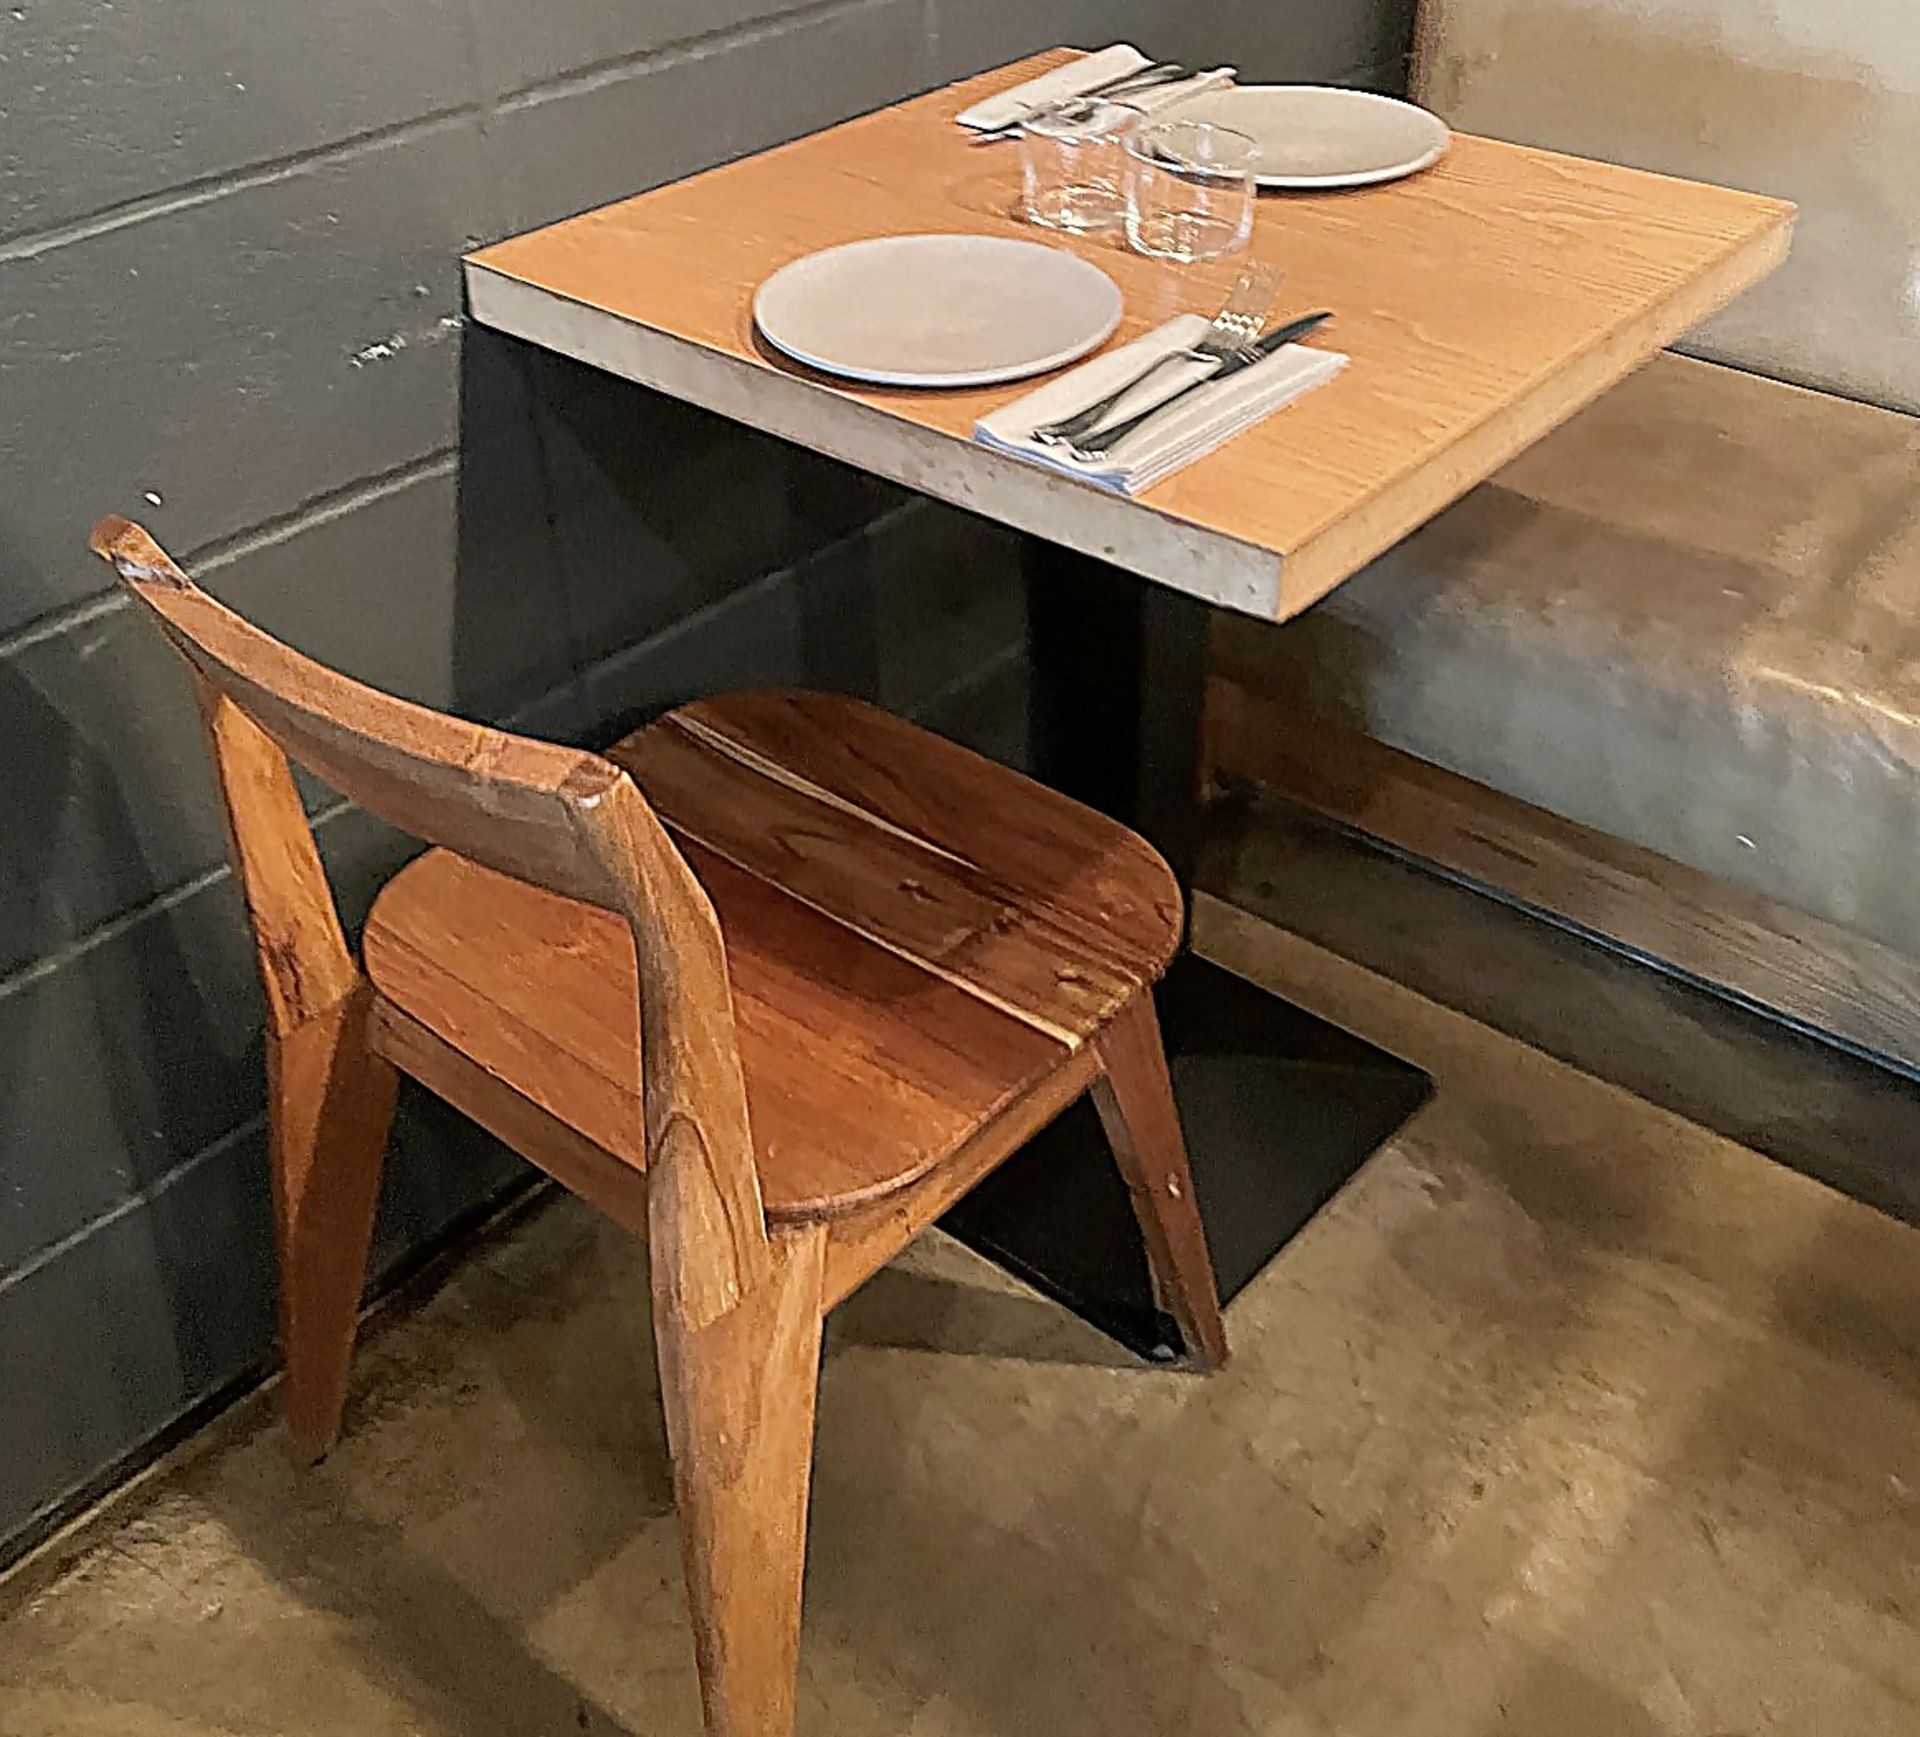 4 x Square Bistro Tables Featuring Wooden Tops And Sturdy Metal Bases - Dimensions To Follow - - Image 3 of 5